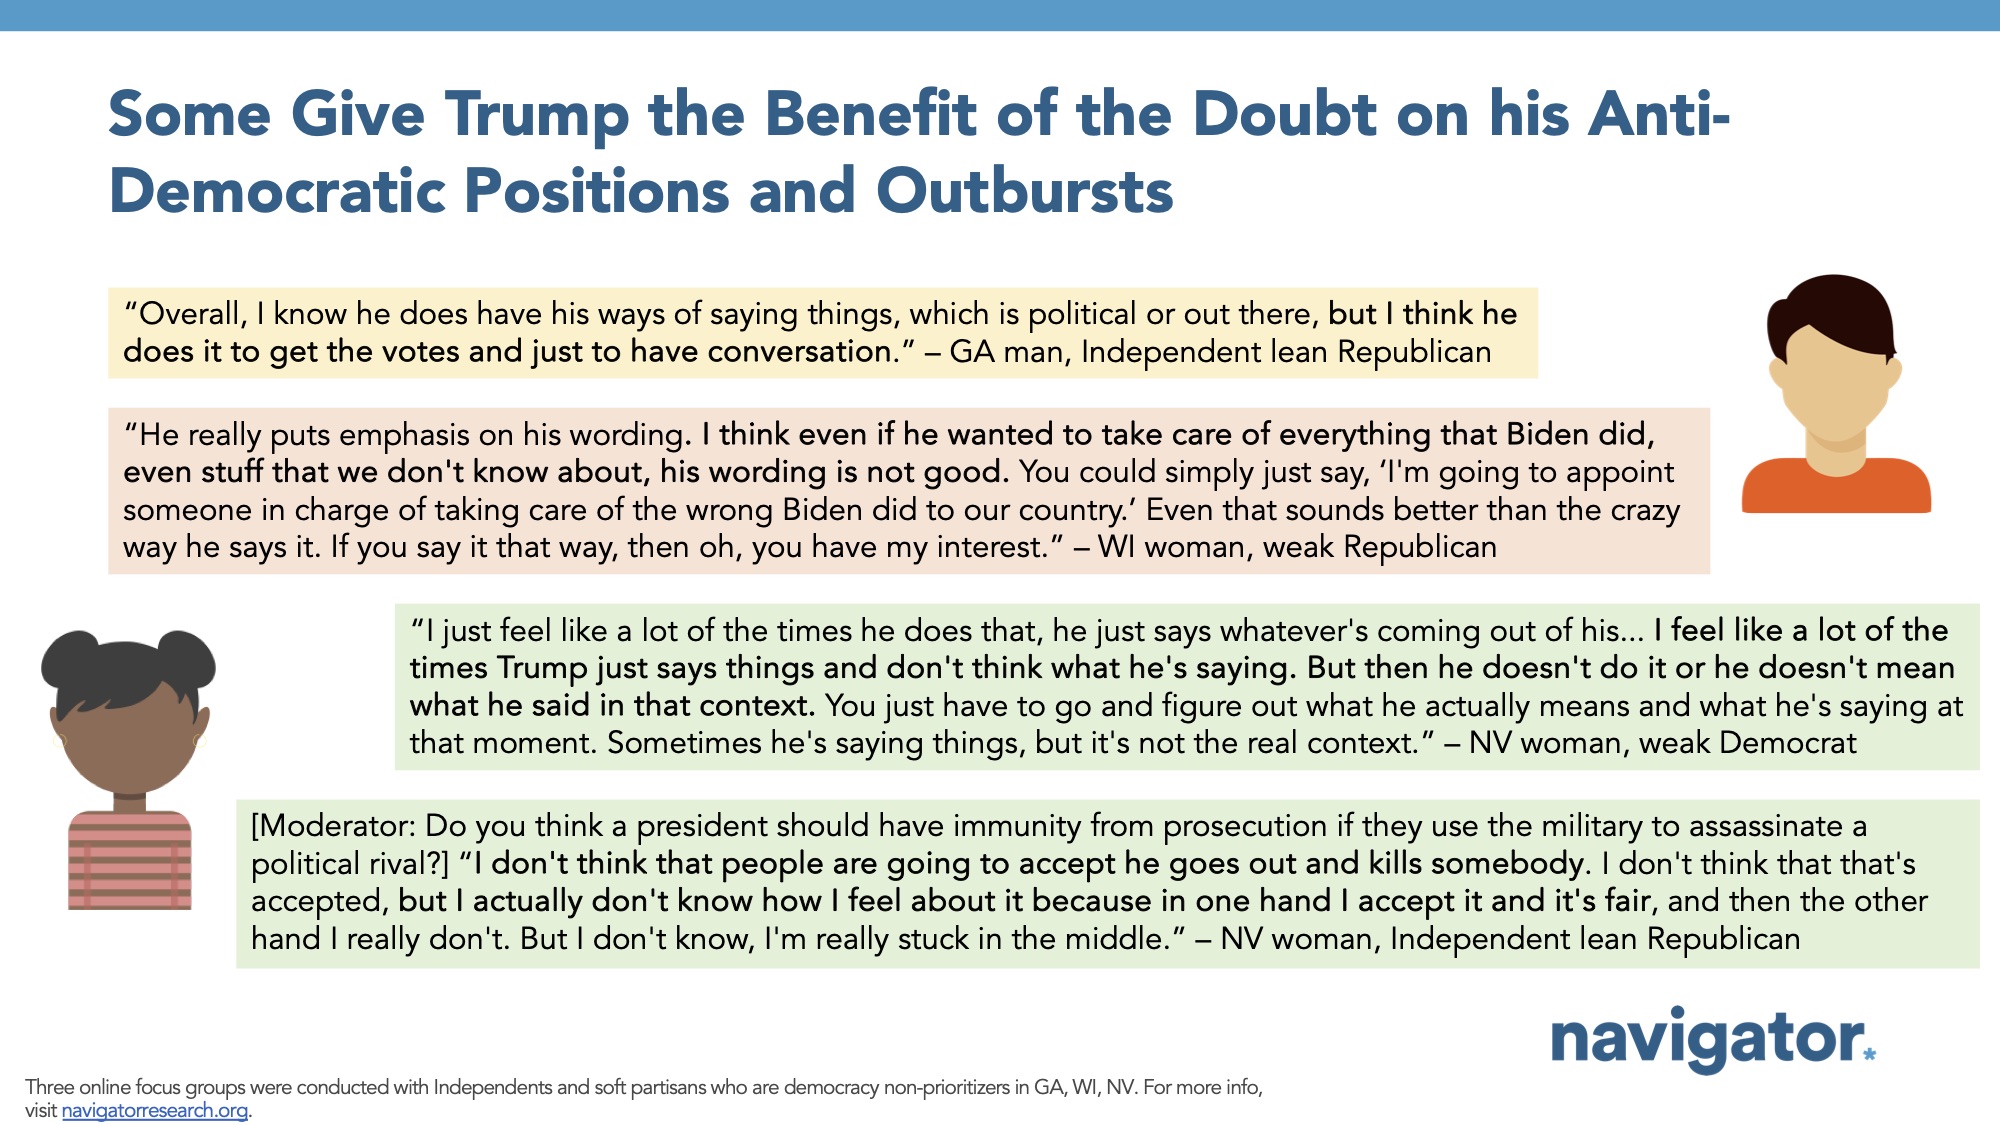 Focus group report slide titled: Some Give Trump the Benefit of the Doubt on his Anti- Democratic Positions and Outbursts